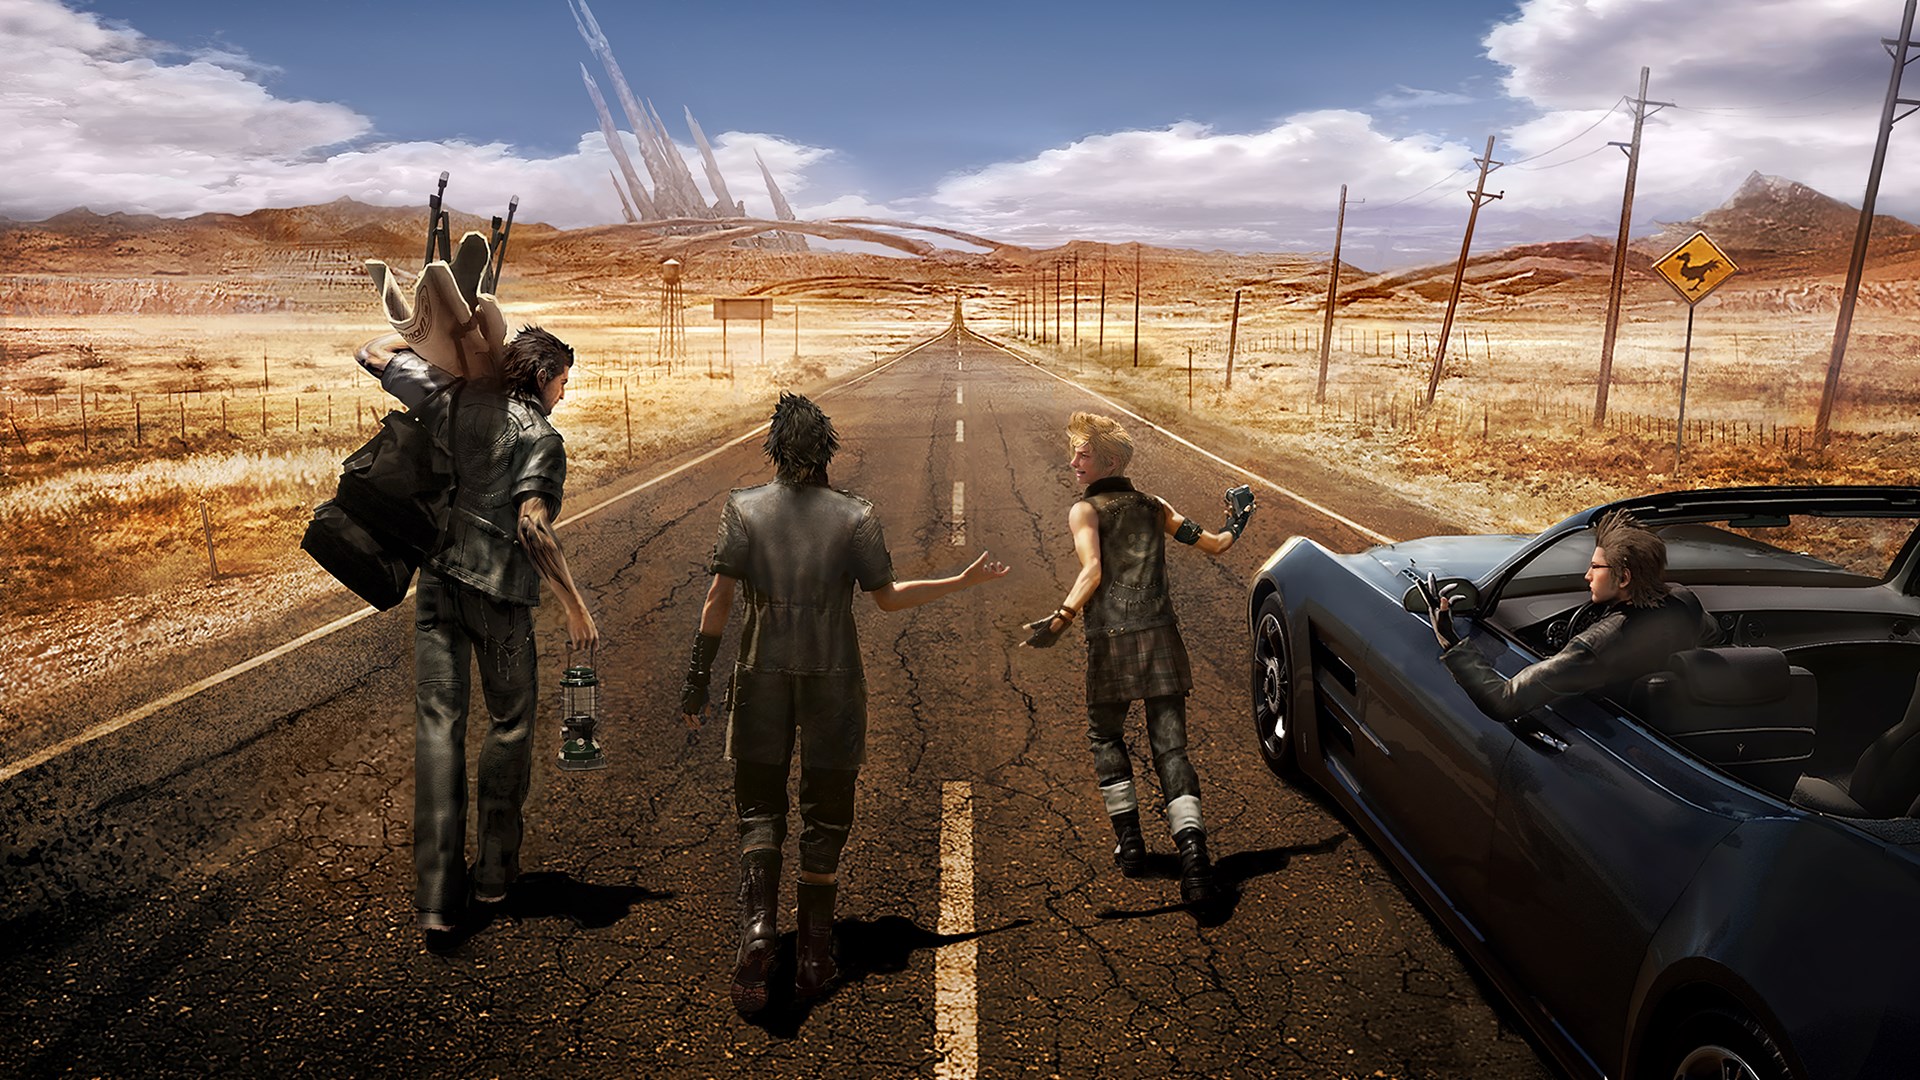 How long is Final Fantasy XV: Complete Edition?